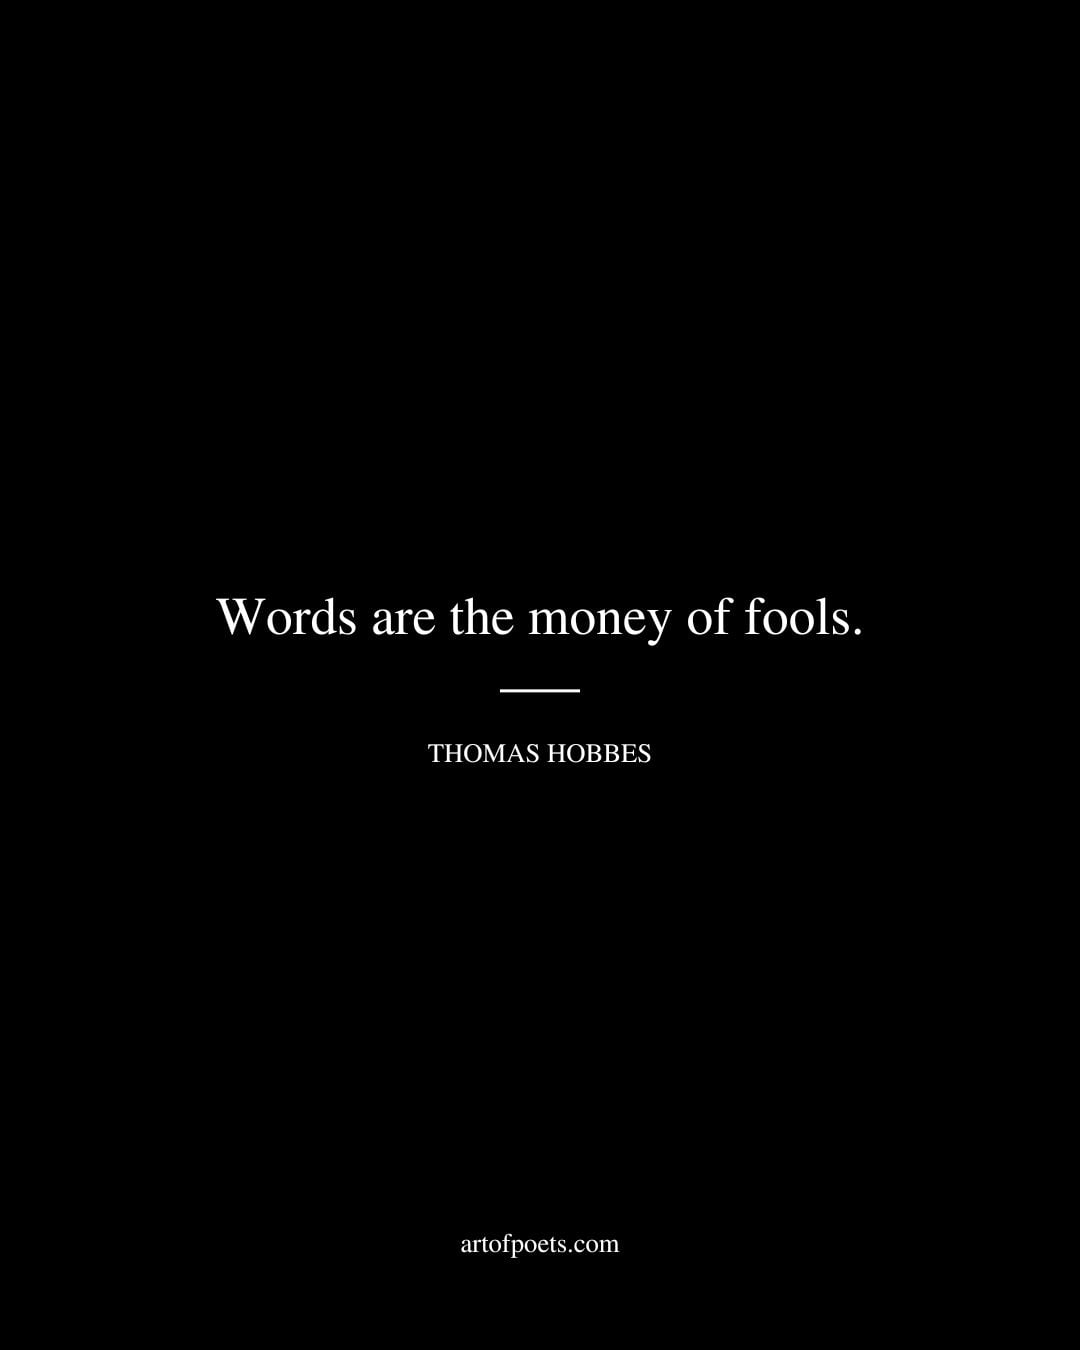 Words are the money of fools